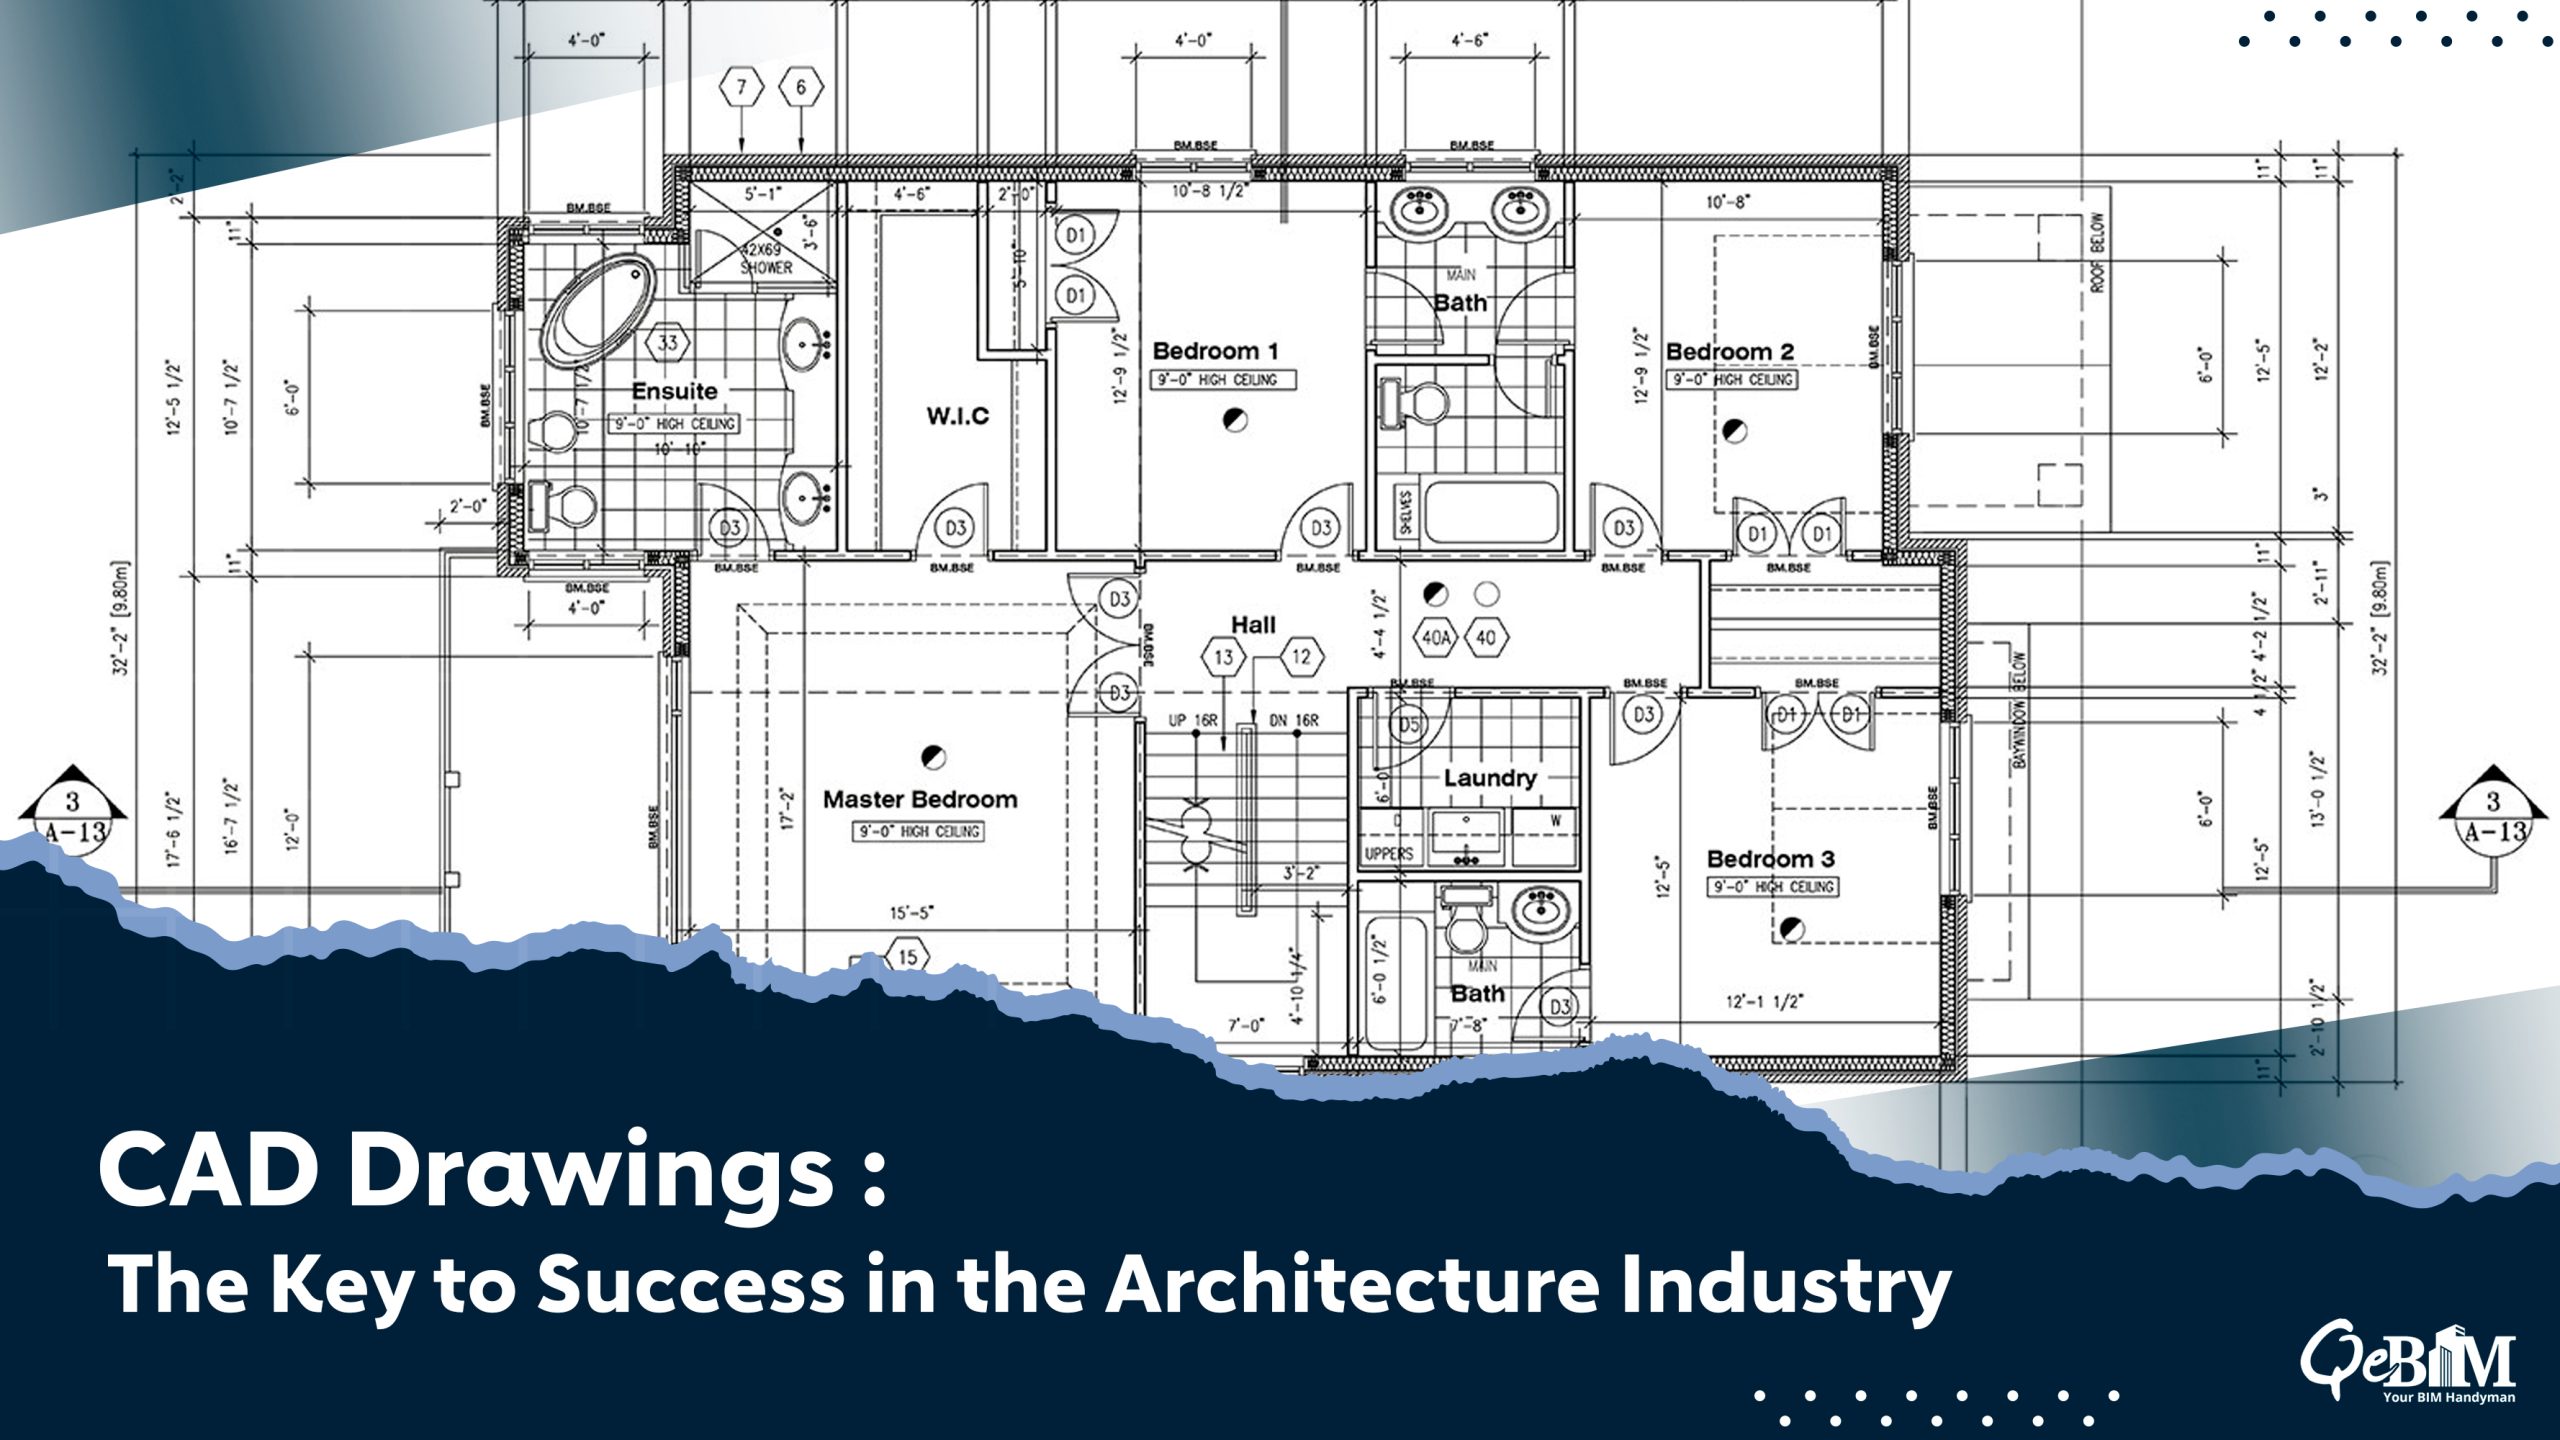 CAD Drawings: The Key to Success in the Architecture Industry